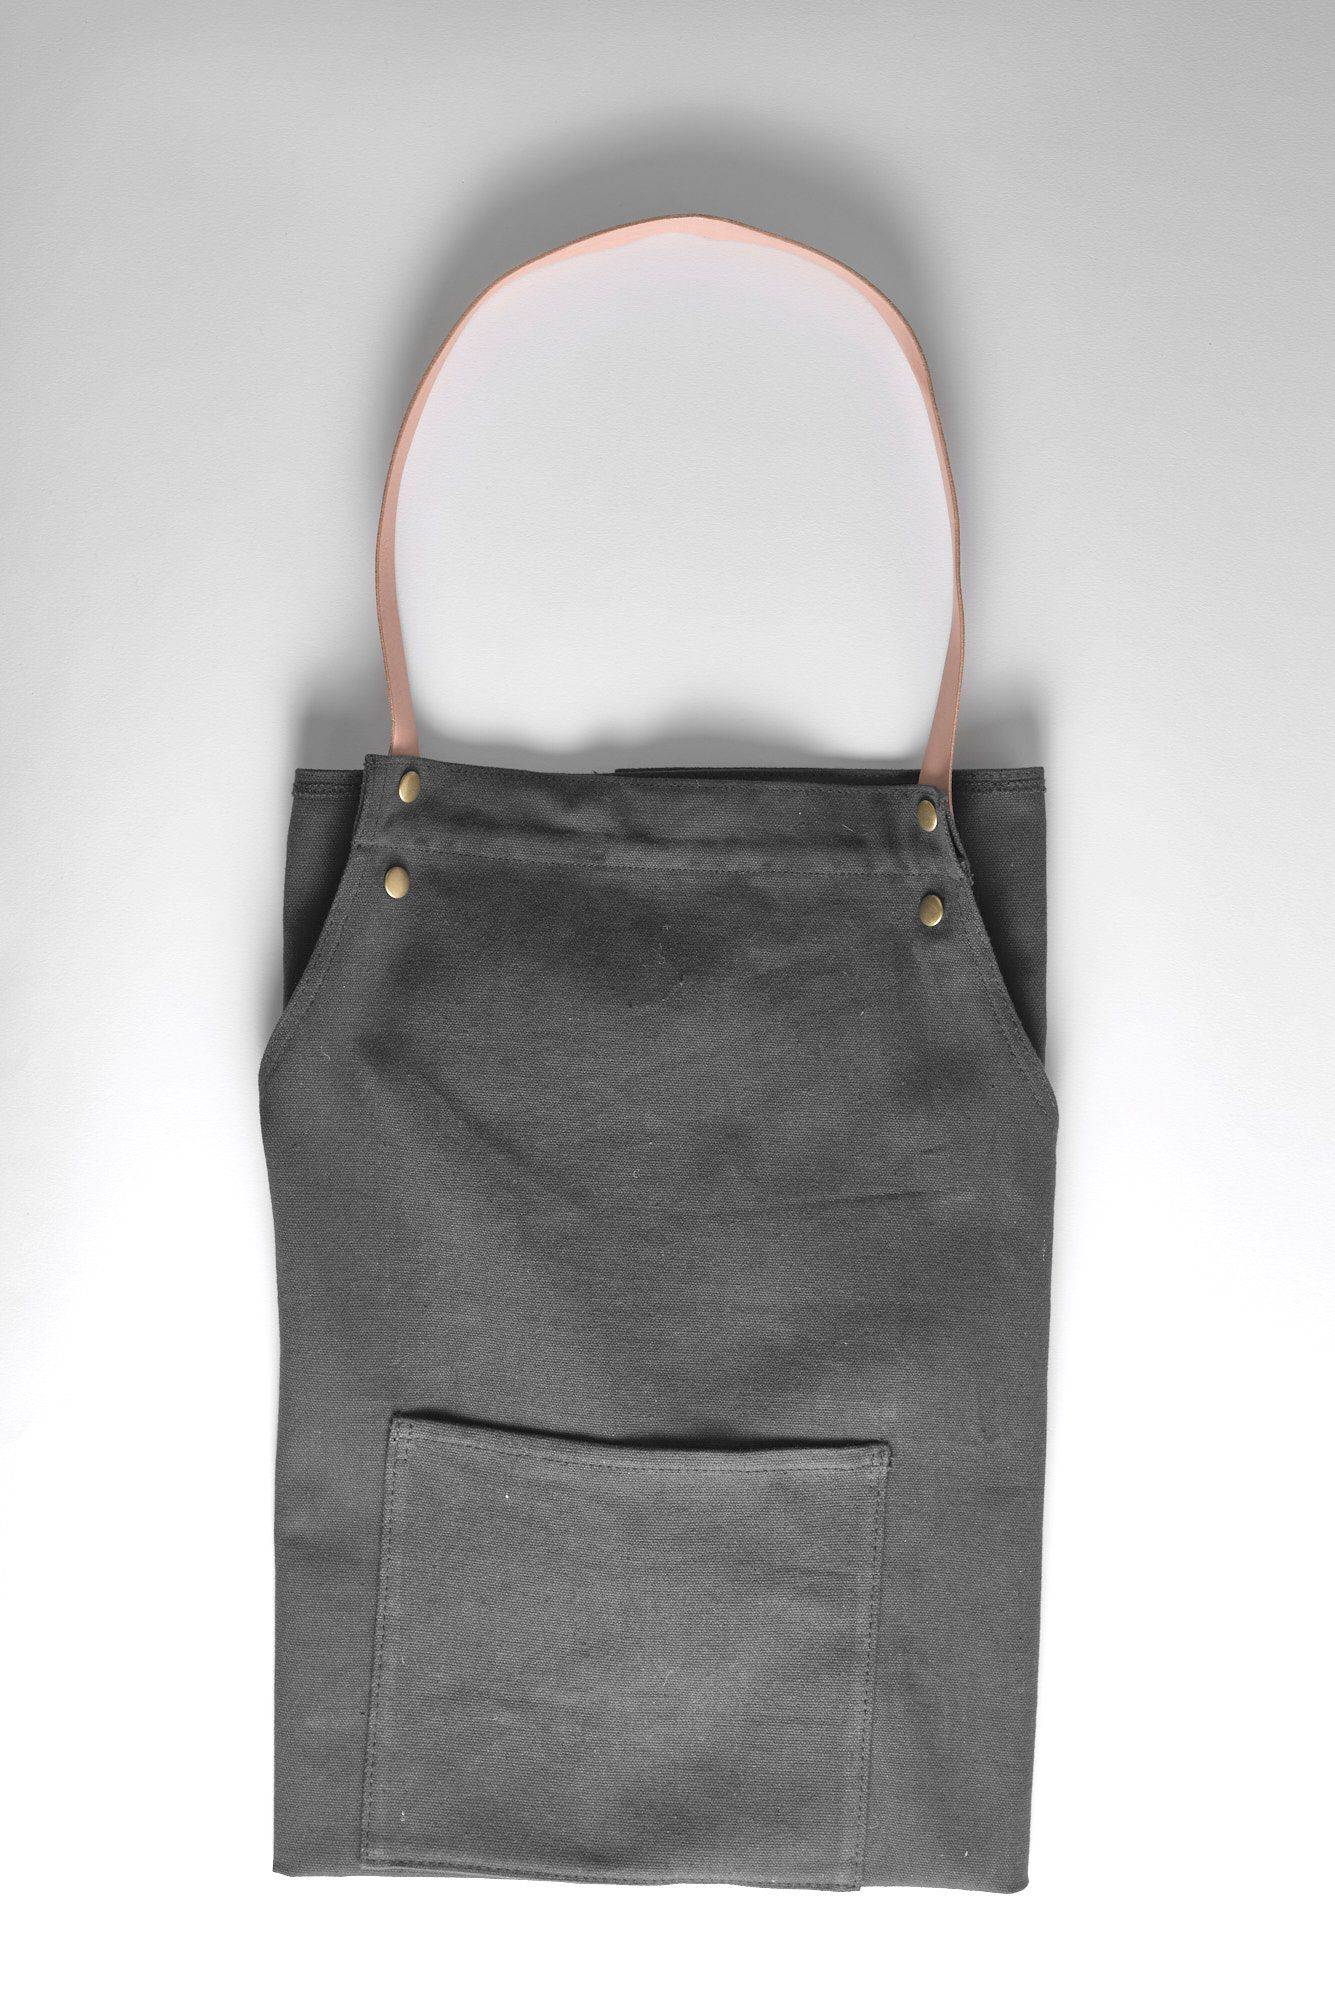 kitchen apron by danish ferm living on white background